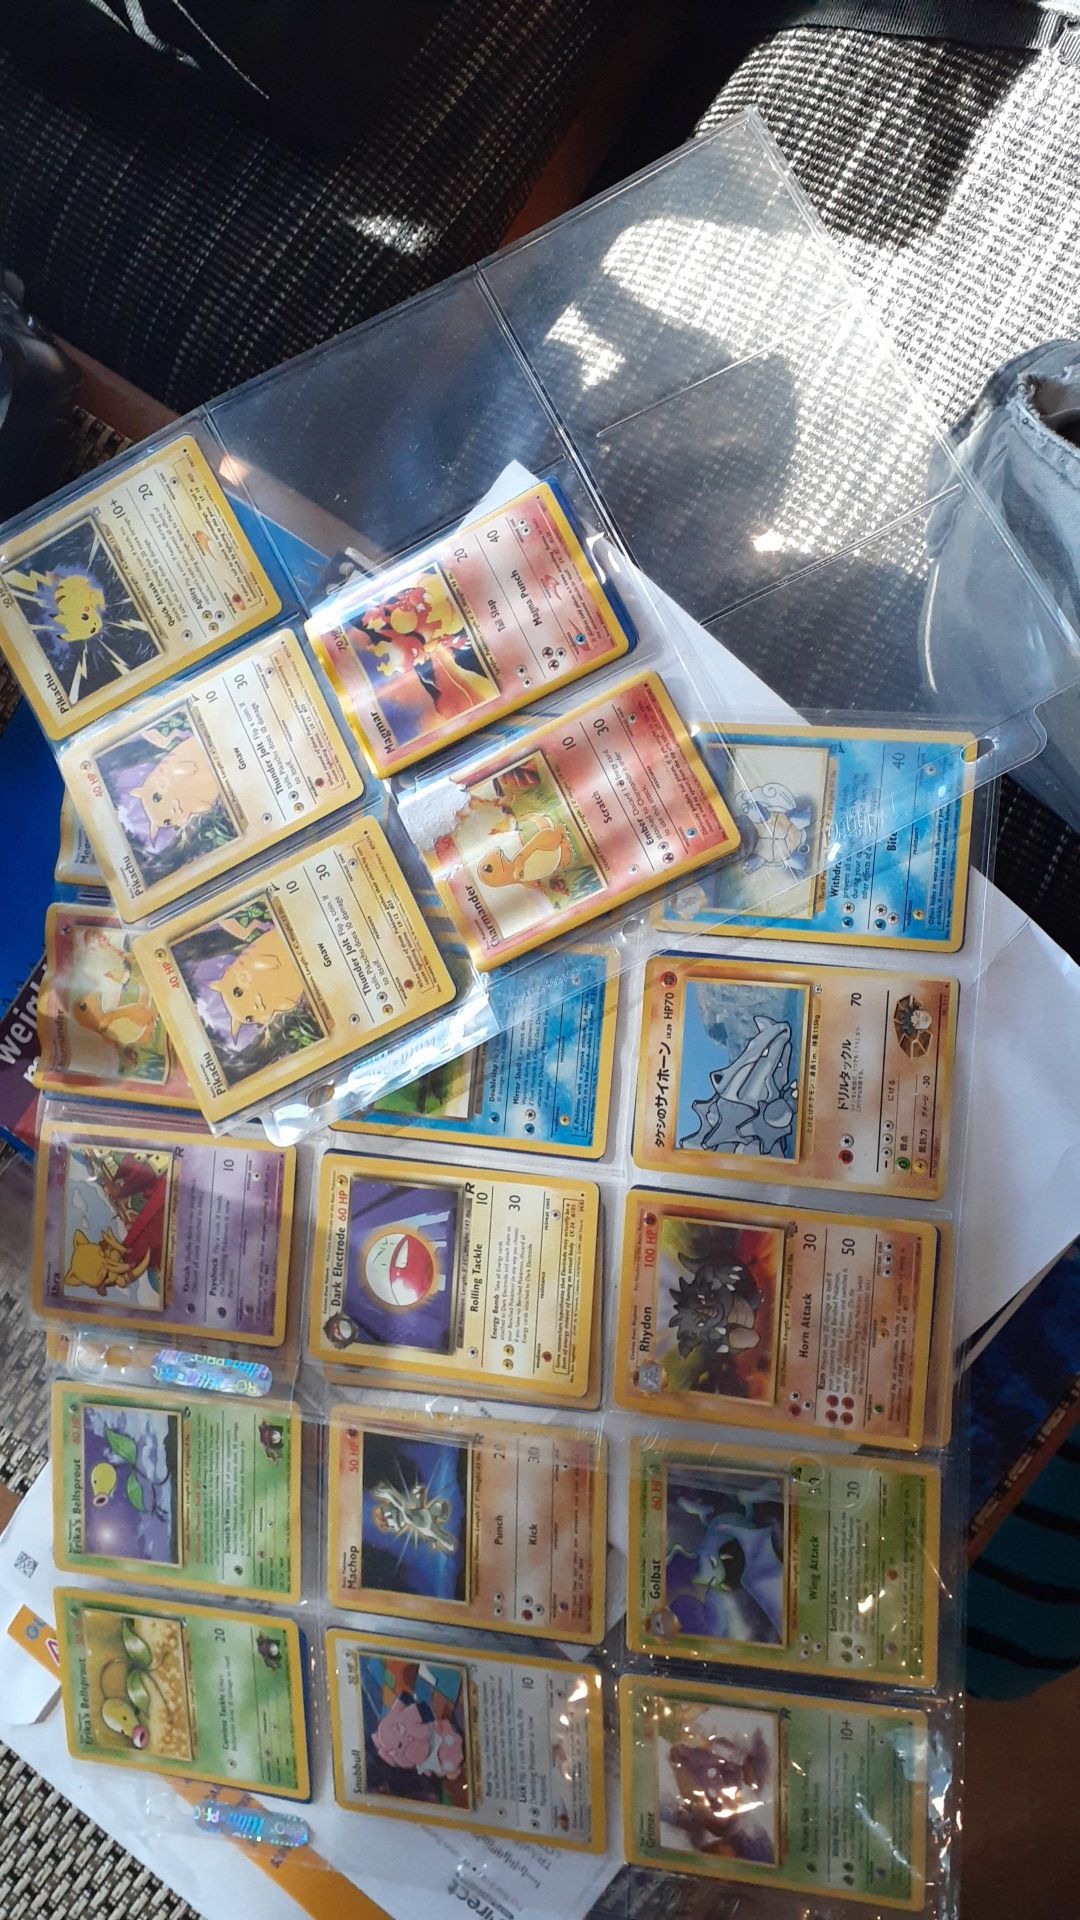 Over 40 Pokemon cards with sleeves, and7 Pikachus.